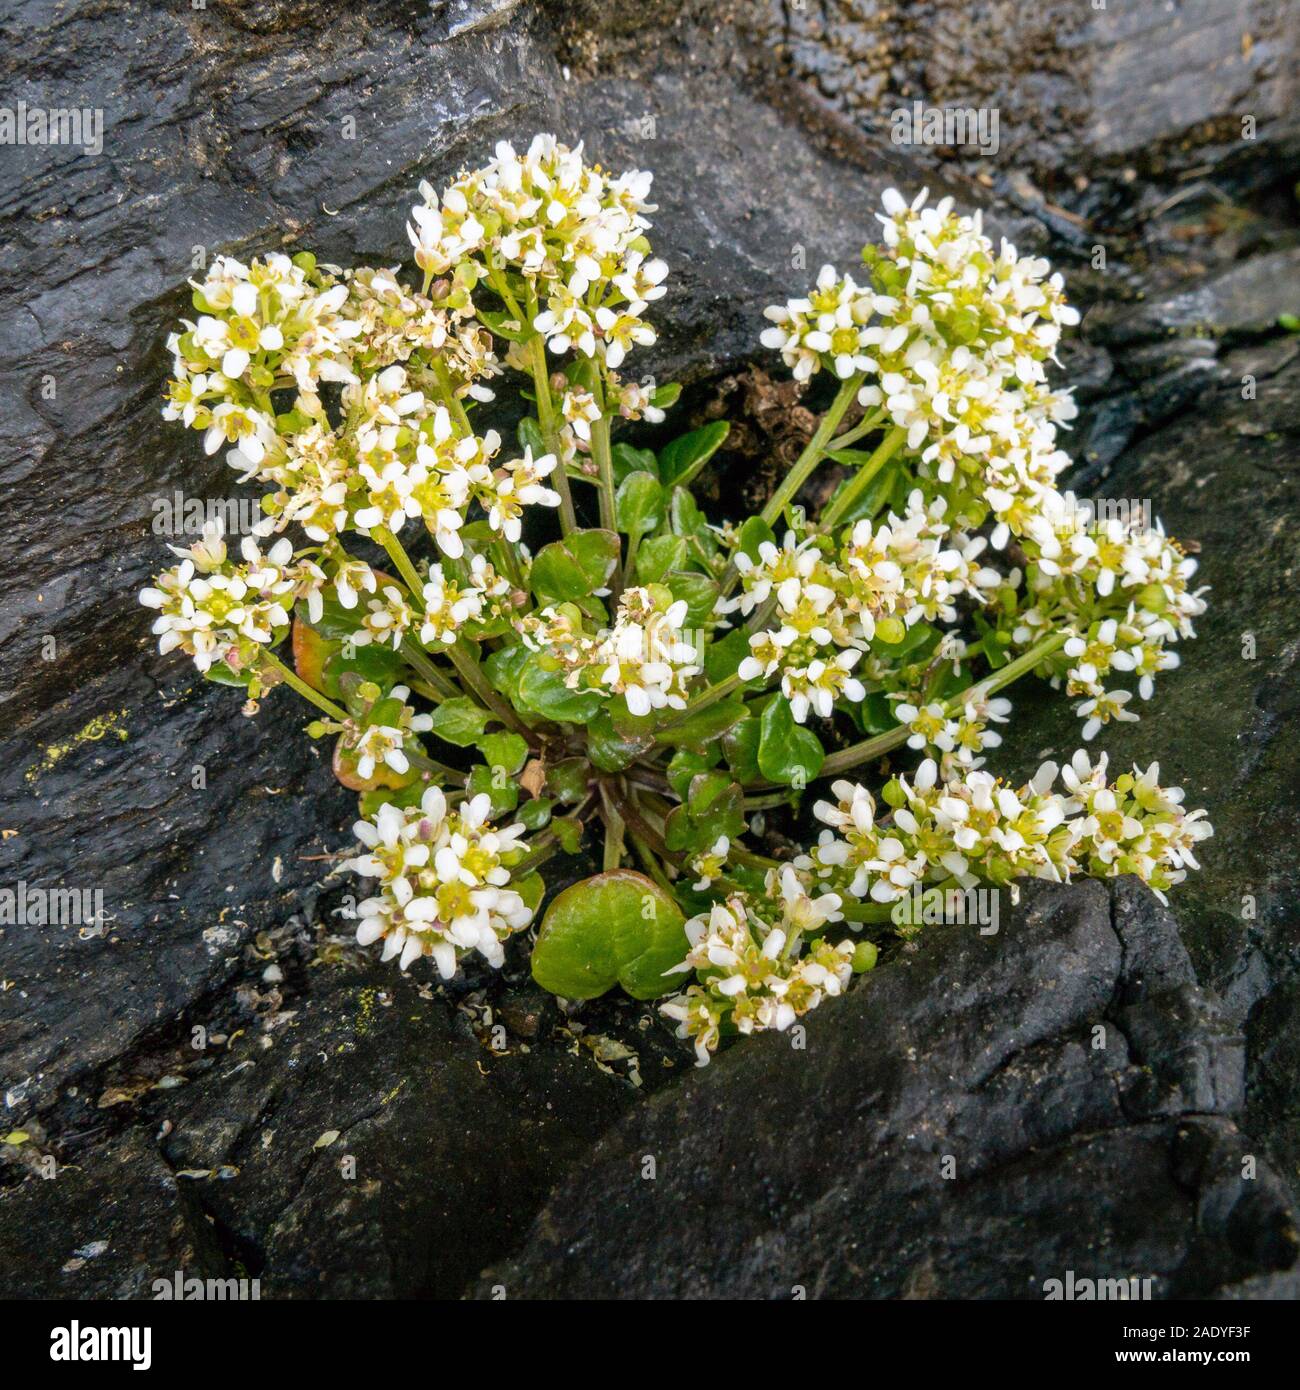 Common scurvy grass ( Cochlearia officinalis ) plant and flowers growing on dark coastal rock, Scotland, UK Stock Photo